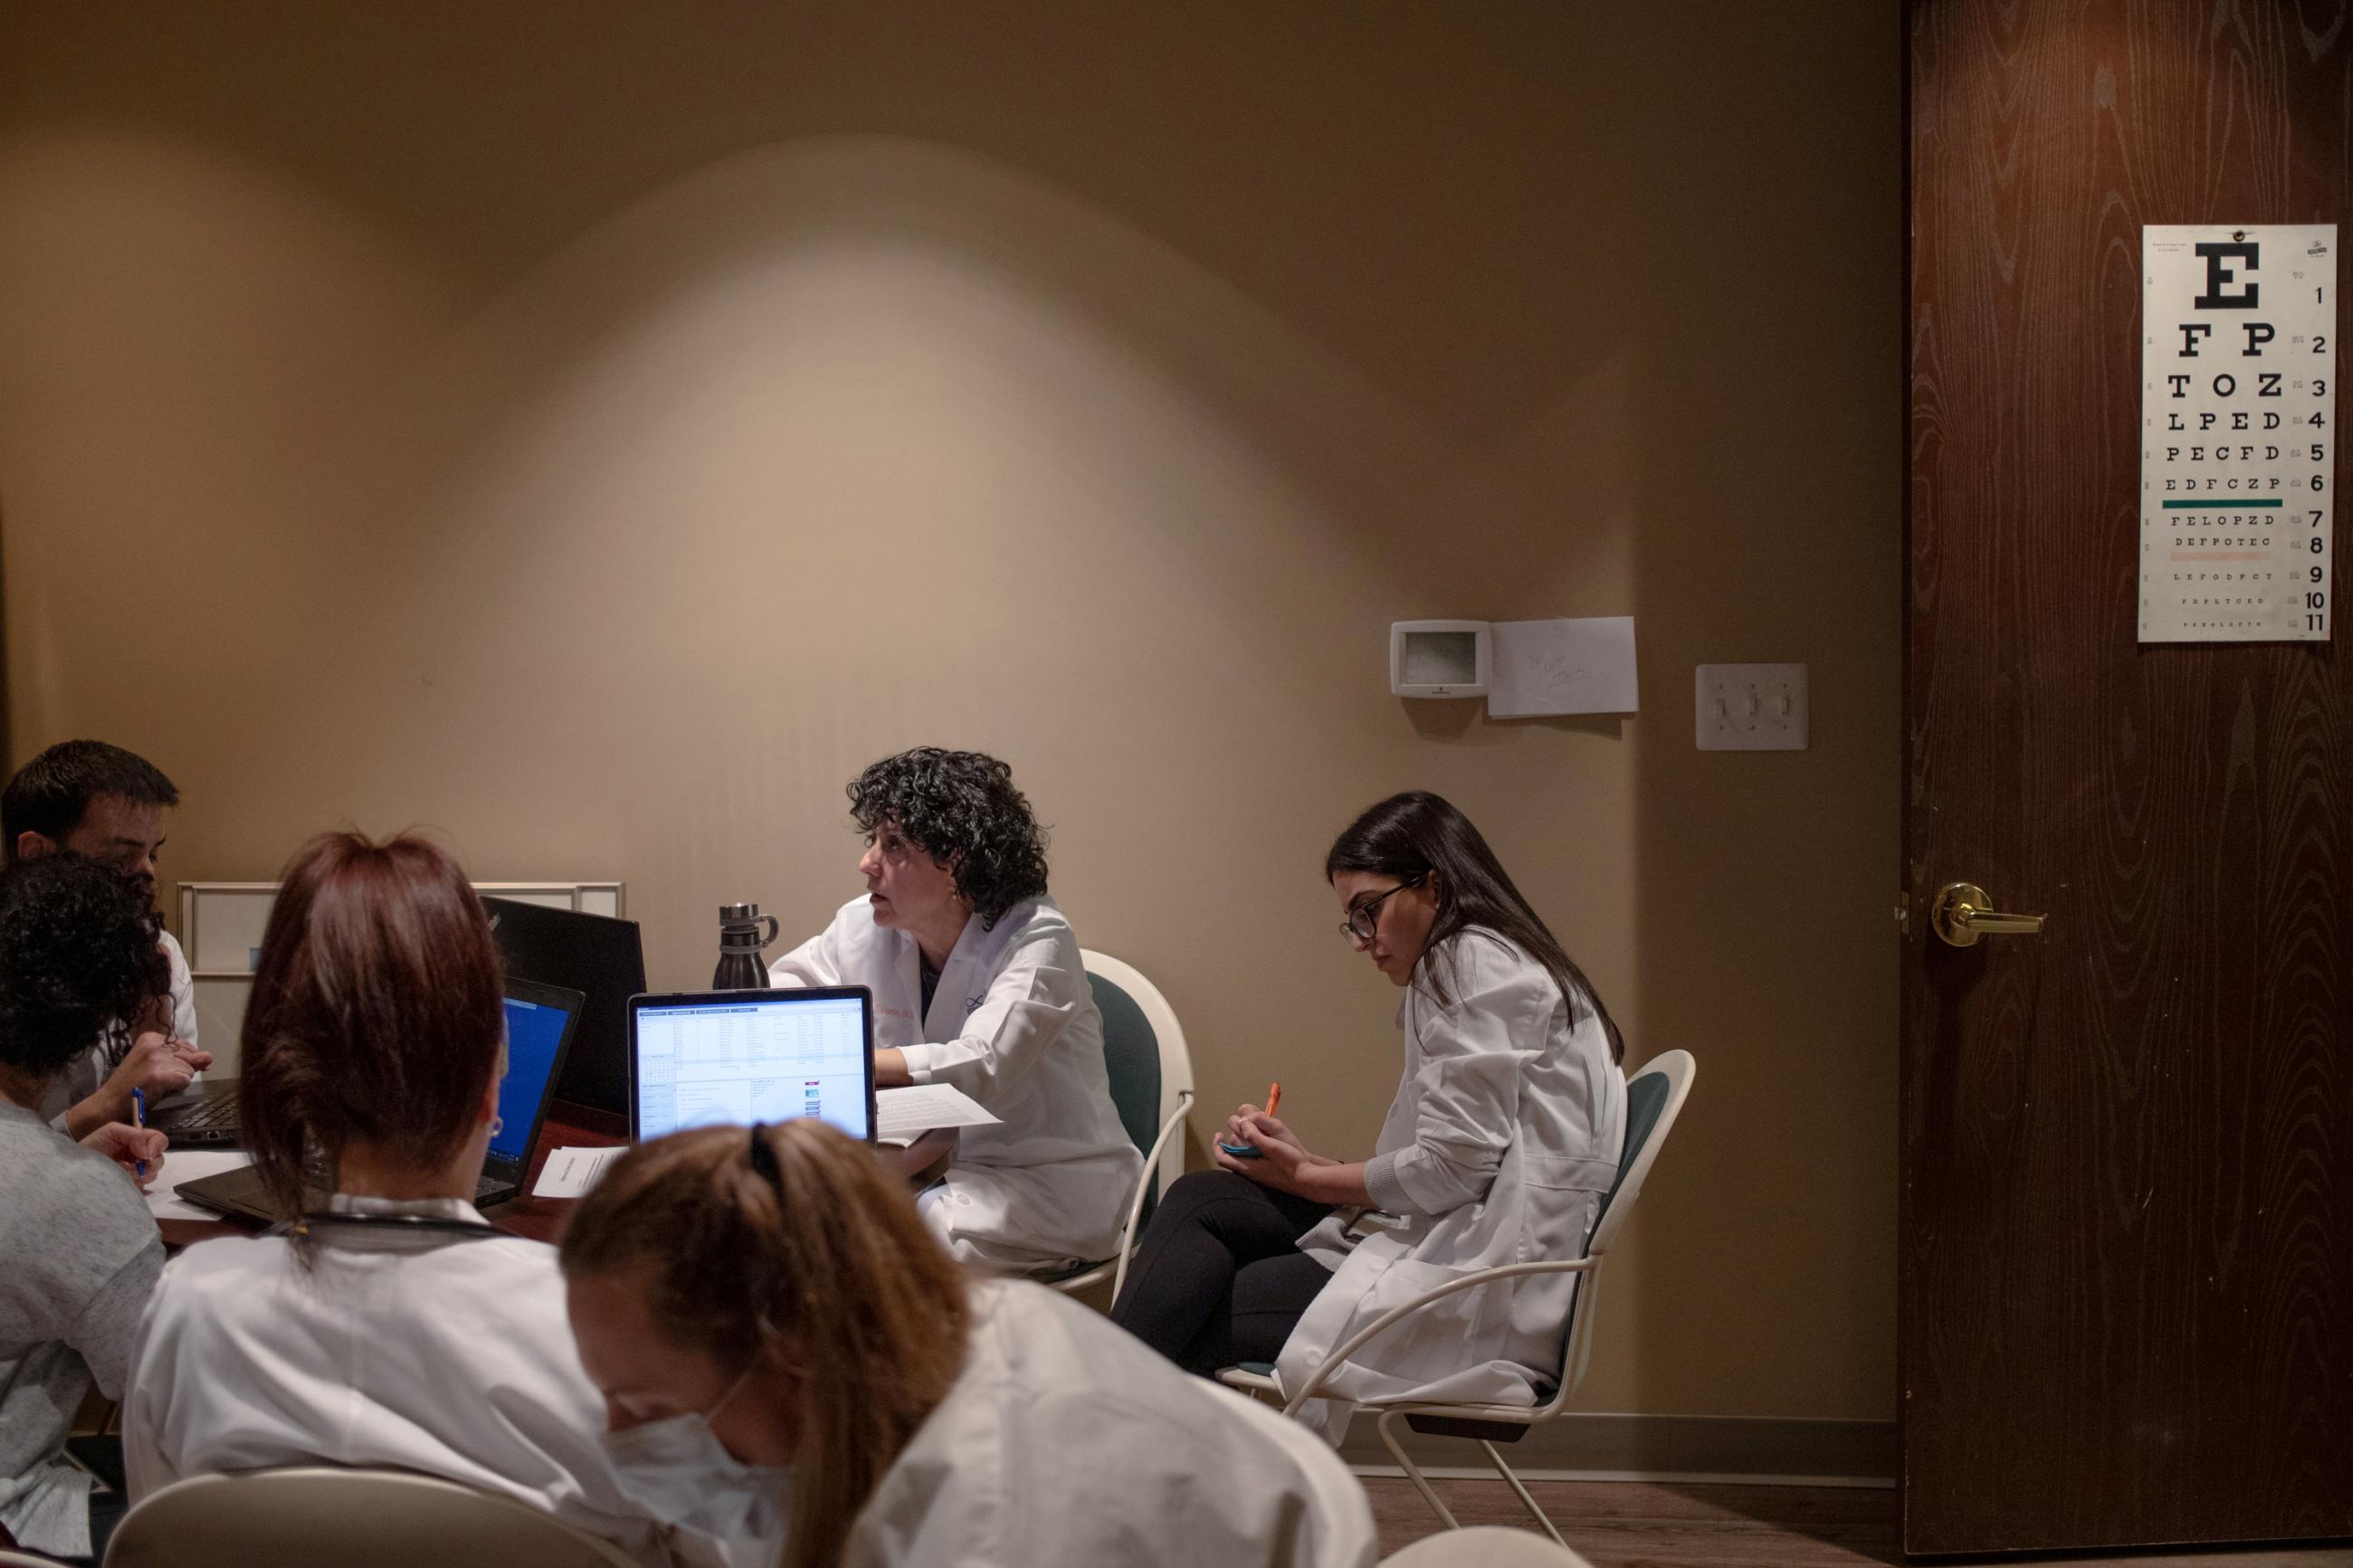 Physicians learn how to conduct virtual appointments amid coronavirus (COVID-19) cases in the country in Michigan, United States, on March 16, 2020.